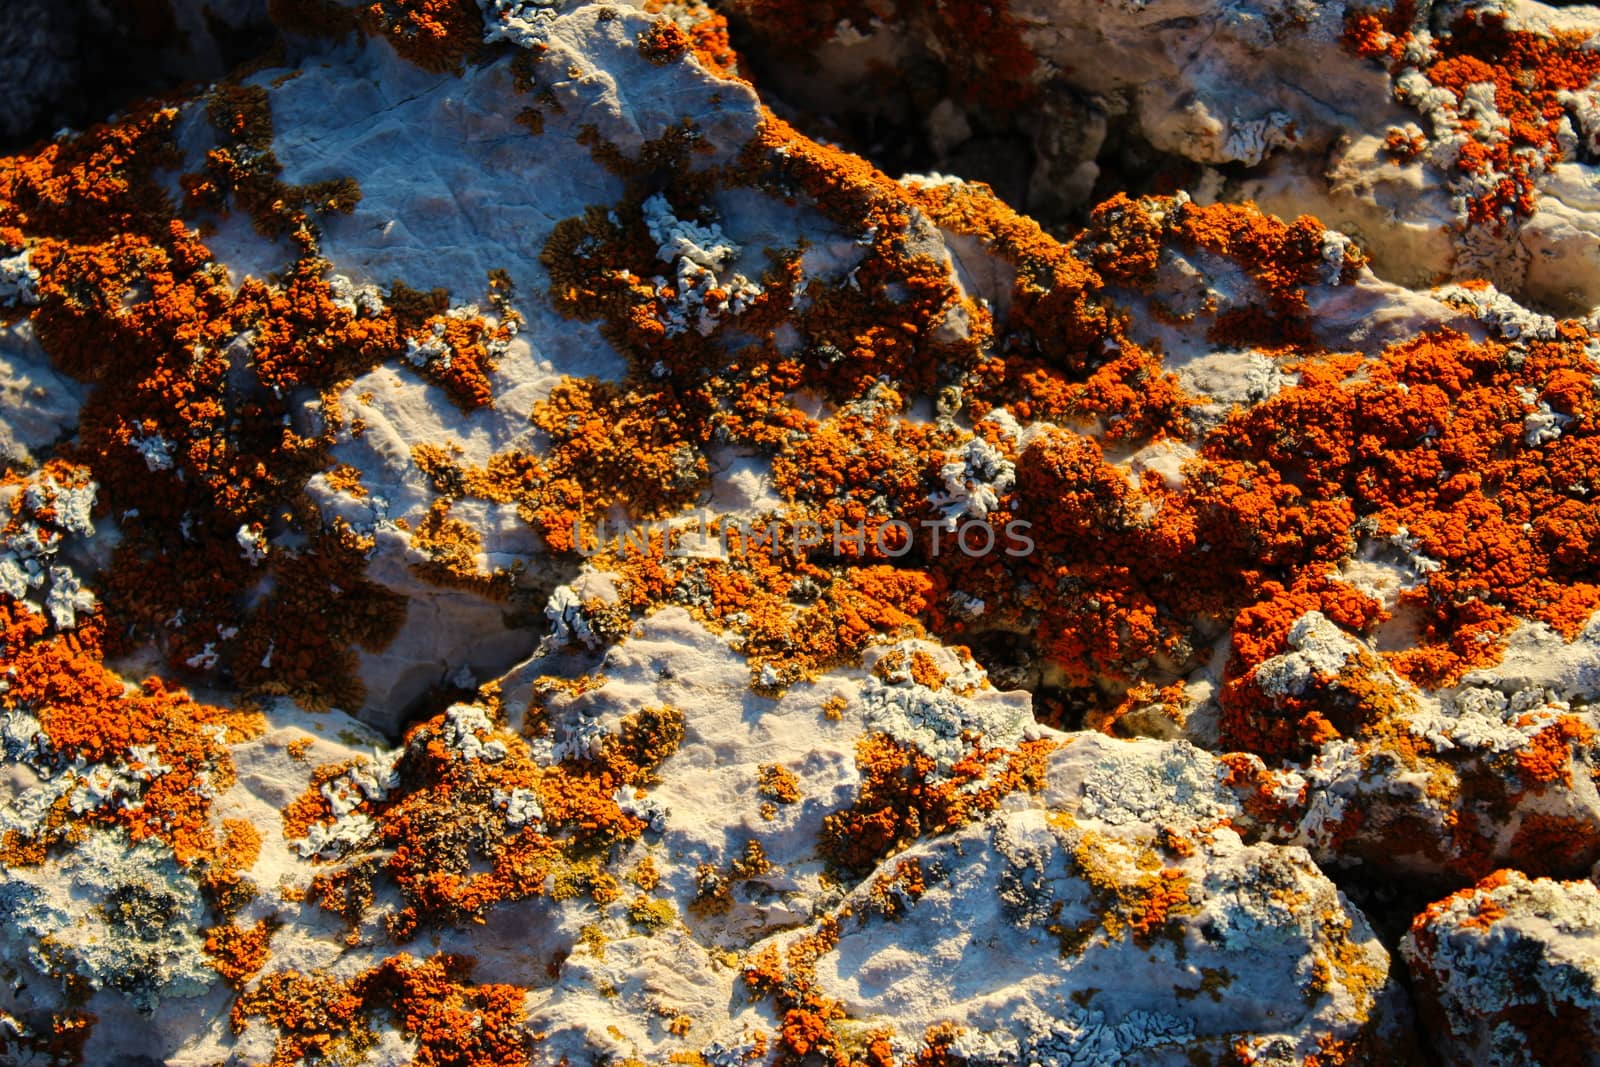 Many colonies of orange lichens on the stone. Like gold on a stone. On the mountain Bjelasnica, Bosnia and Herzegovina.